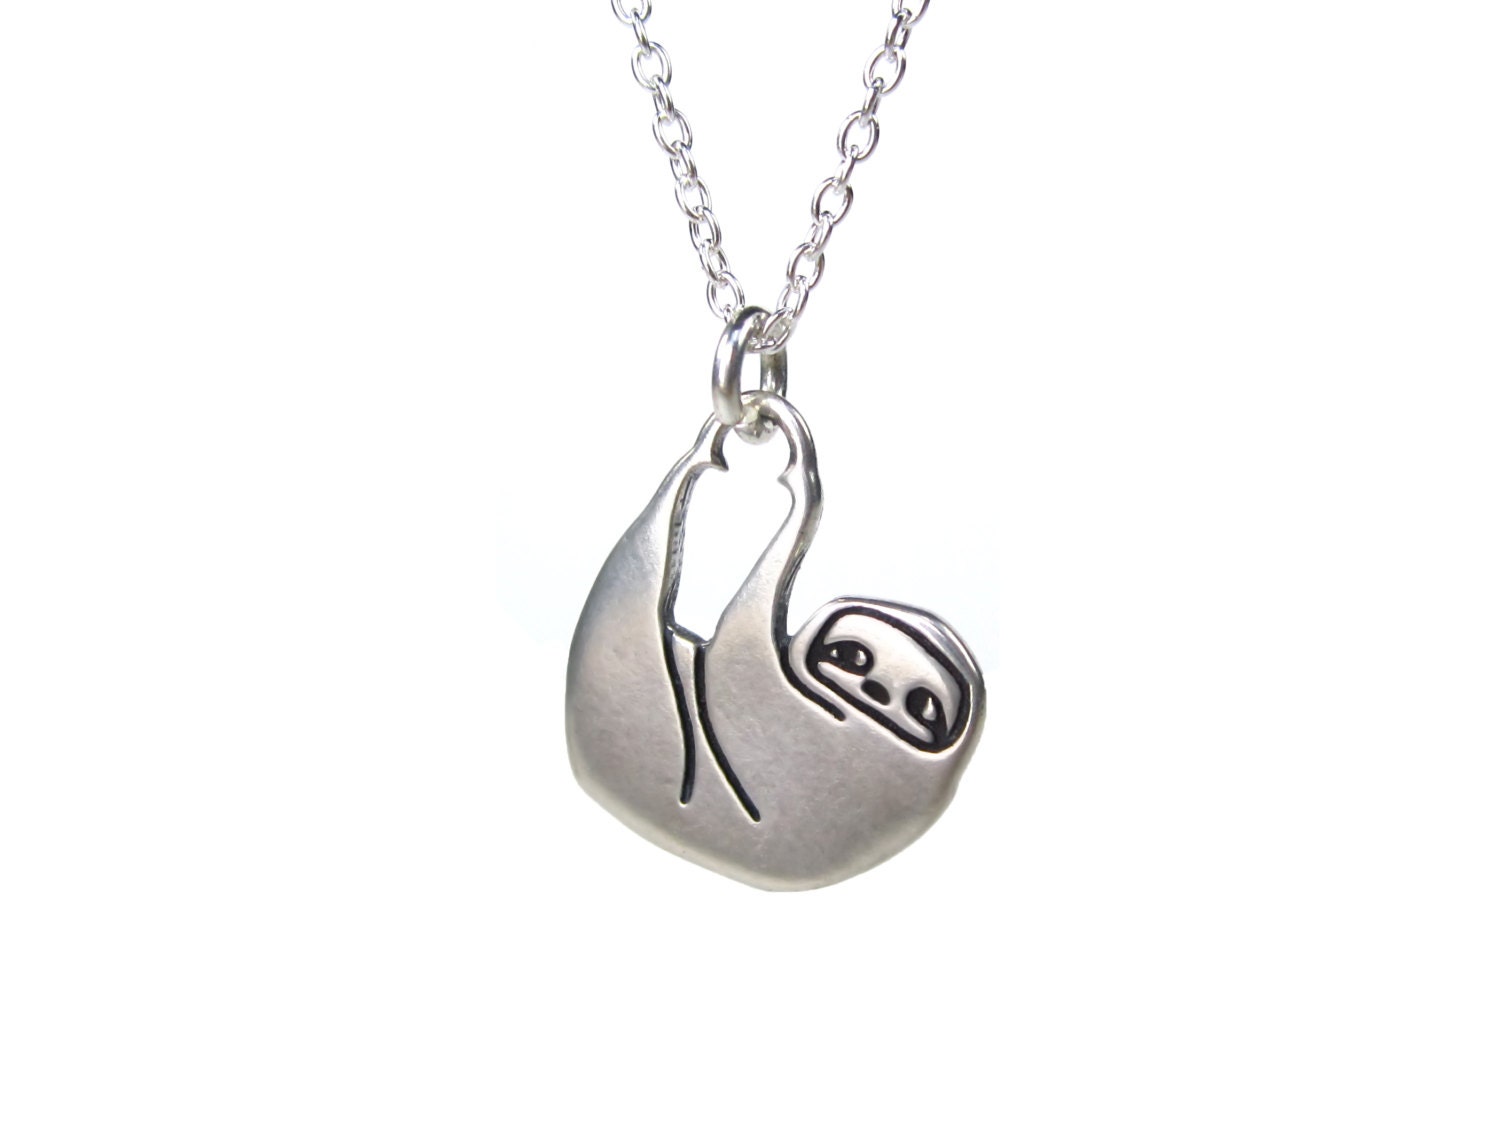 Little Sloth Necklace Sterling Silver Sloth Pendant or Charm